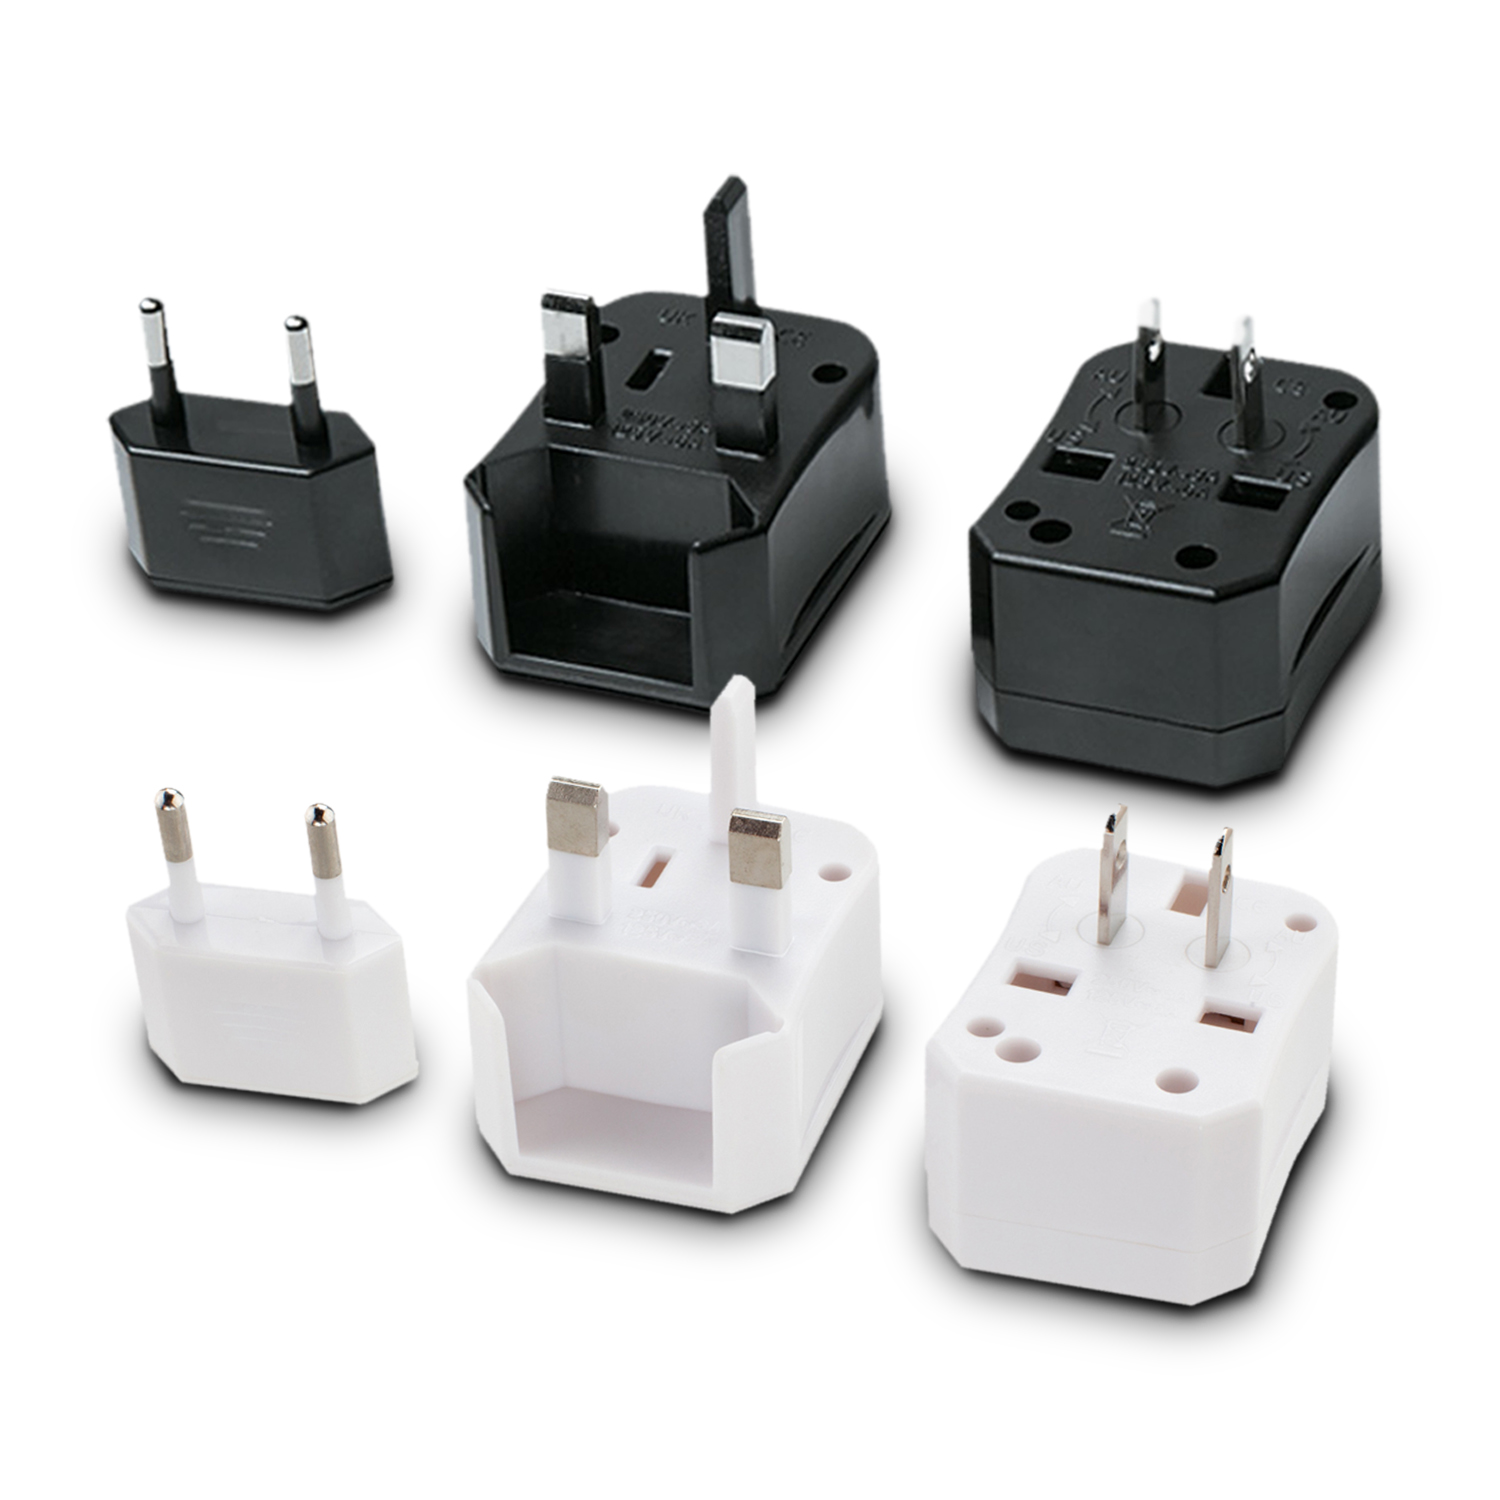 universal travel adapter in usa